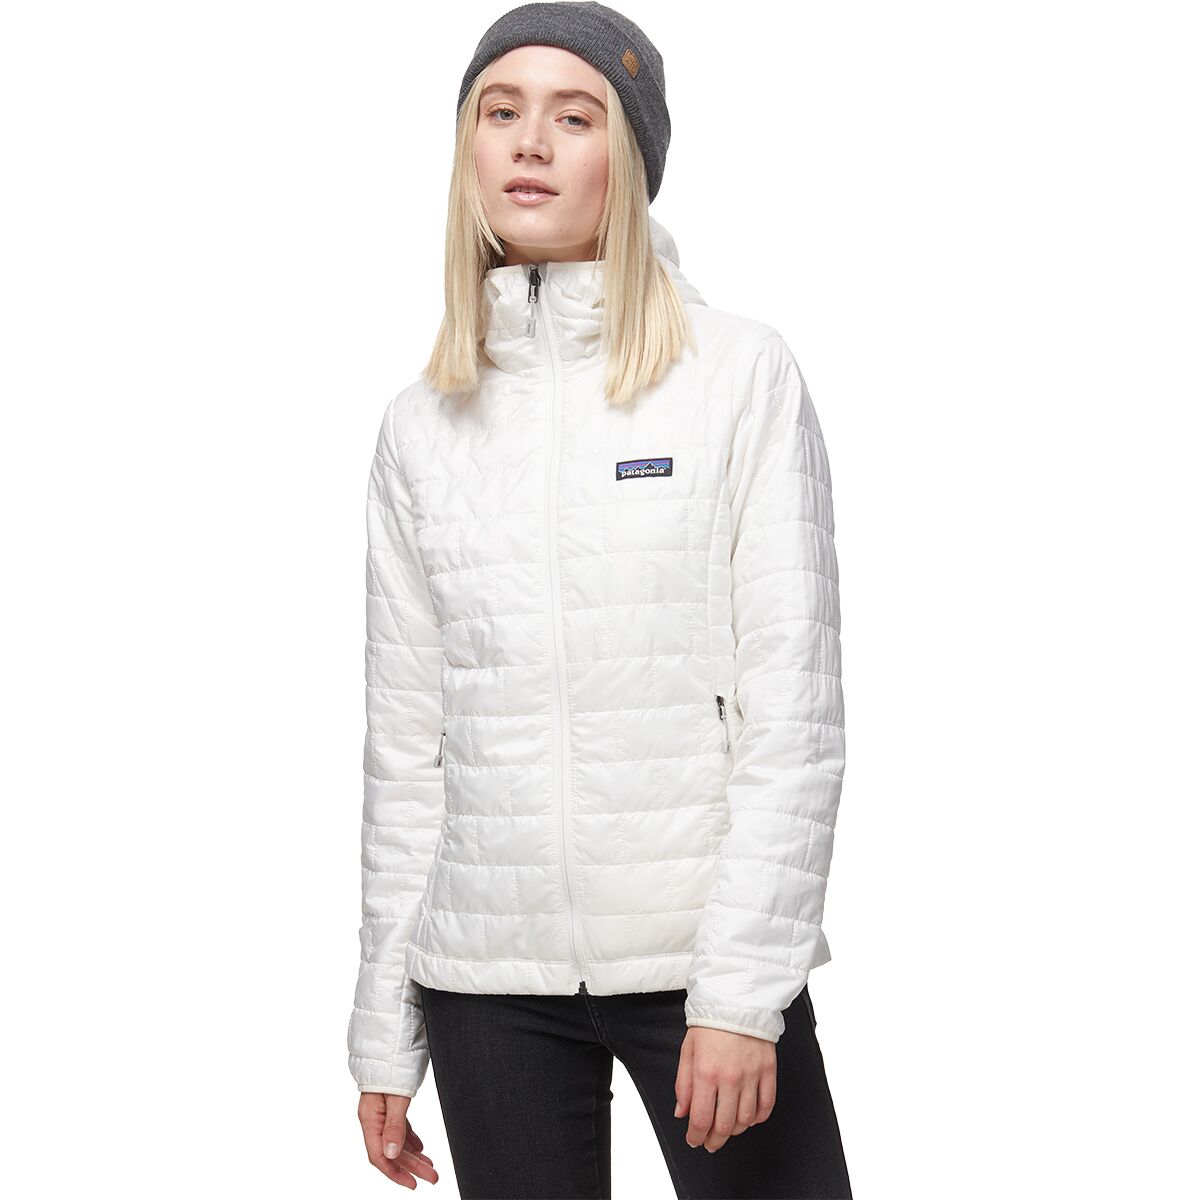 Patagonia Nano Puff Hooded Insulated Jacket - Women's Birch White L -  84227-BCW-L